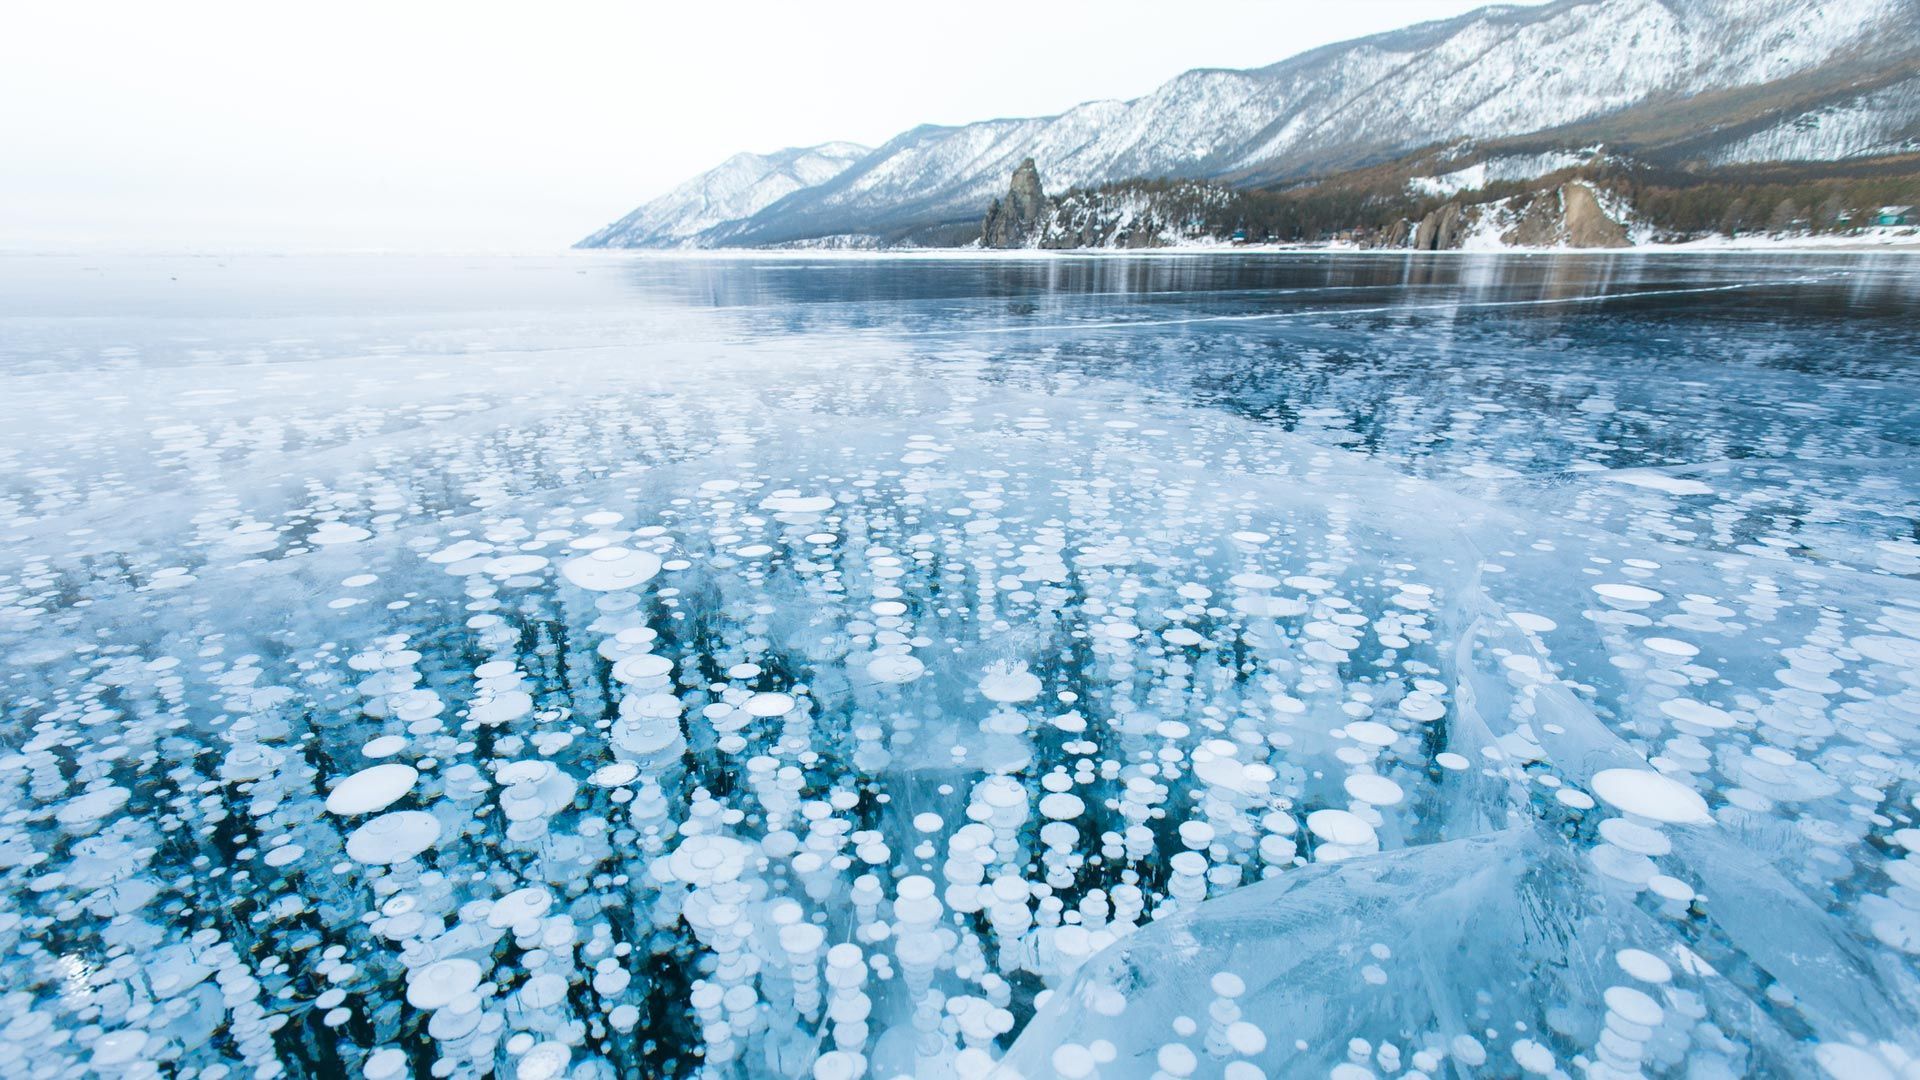 Turquoise Ice of Lake Baikal Wallpapers: 20+ Image, Nature Category